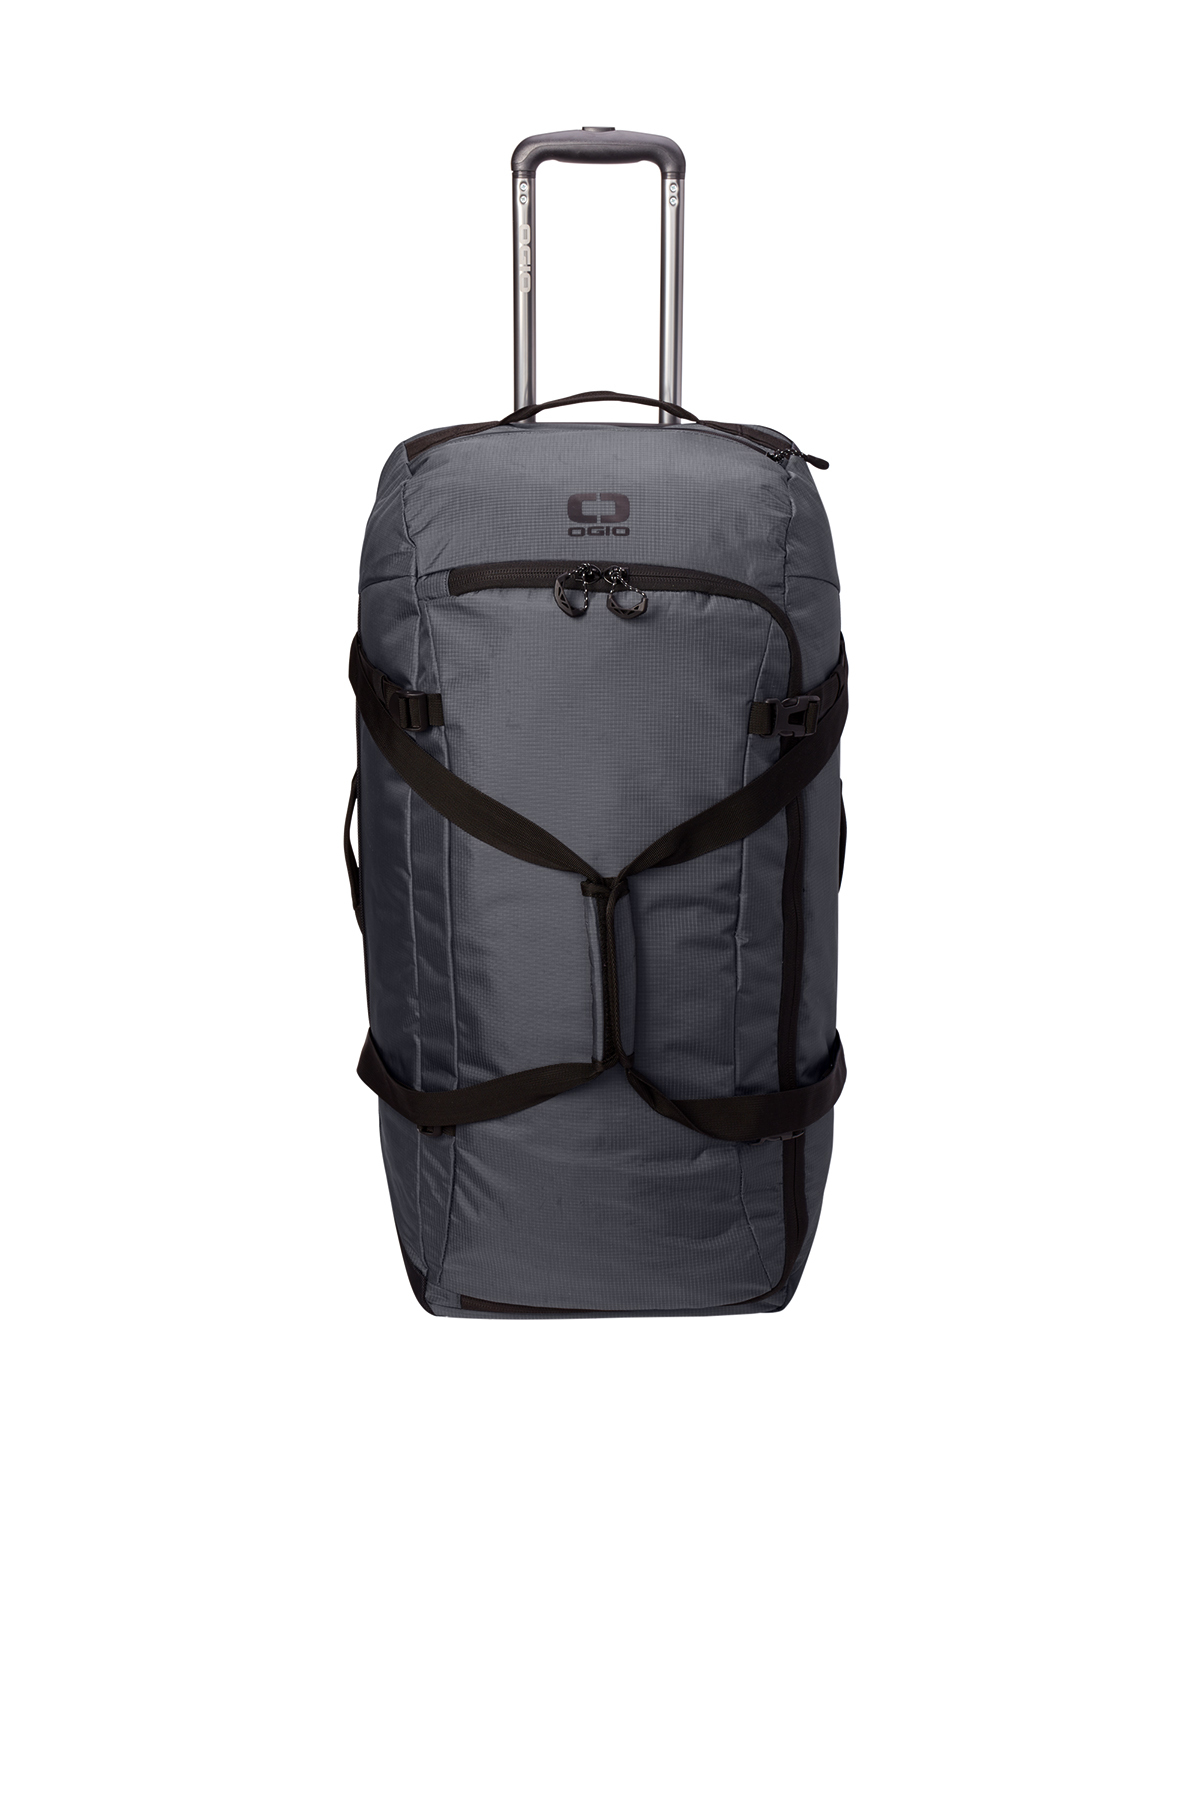 OGIO Passage Wheeled Checked Duffel | Product | SanMar